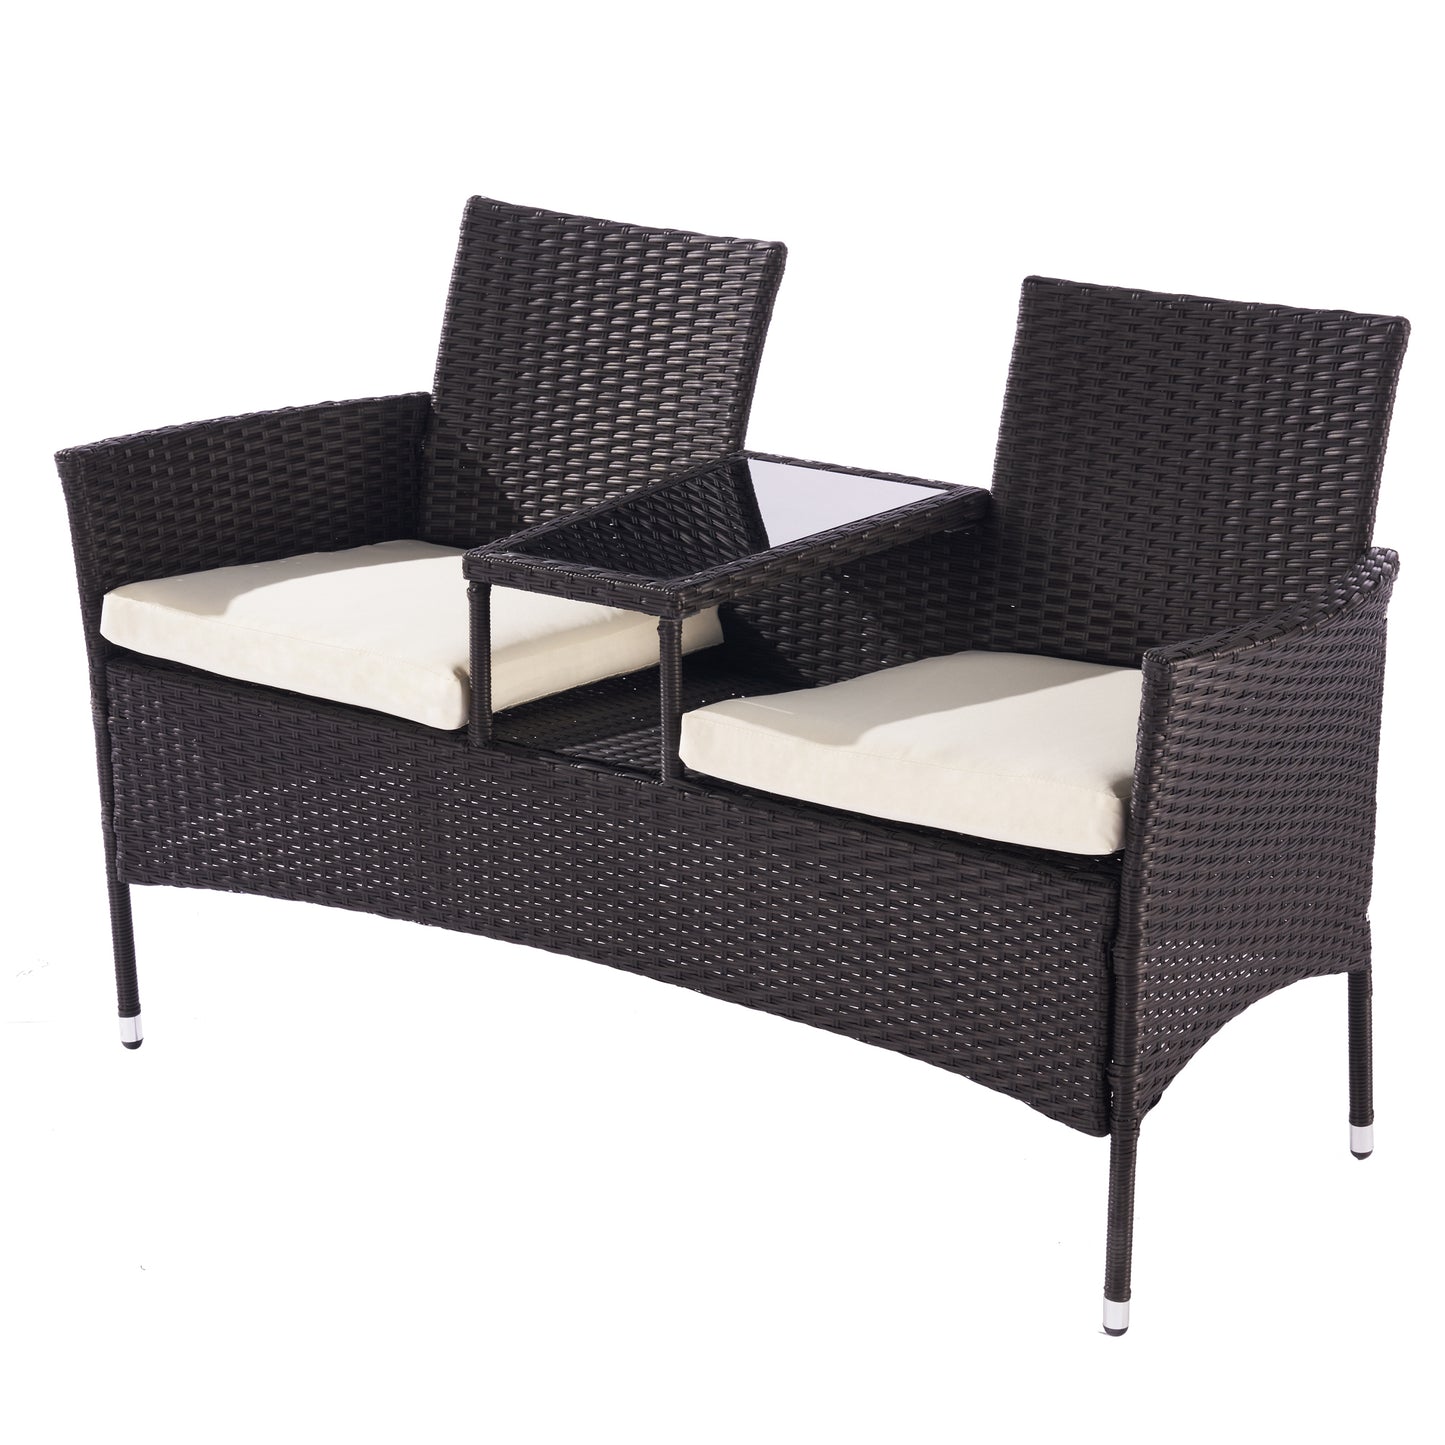 Outdoor Rattan Furniture Sofa And Table Set